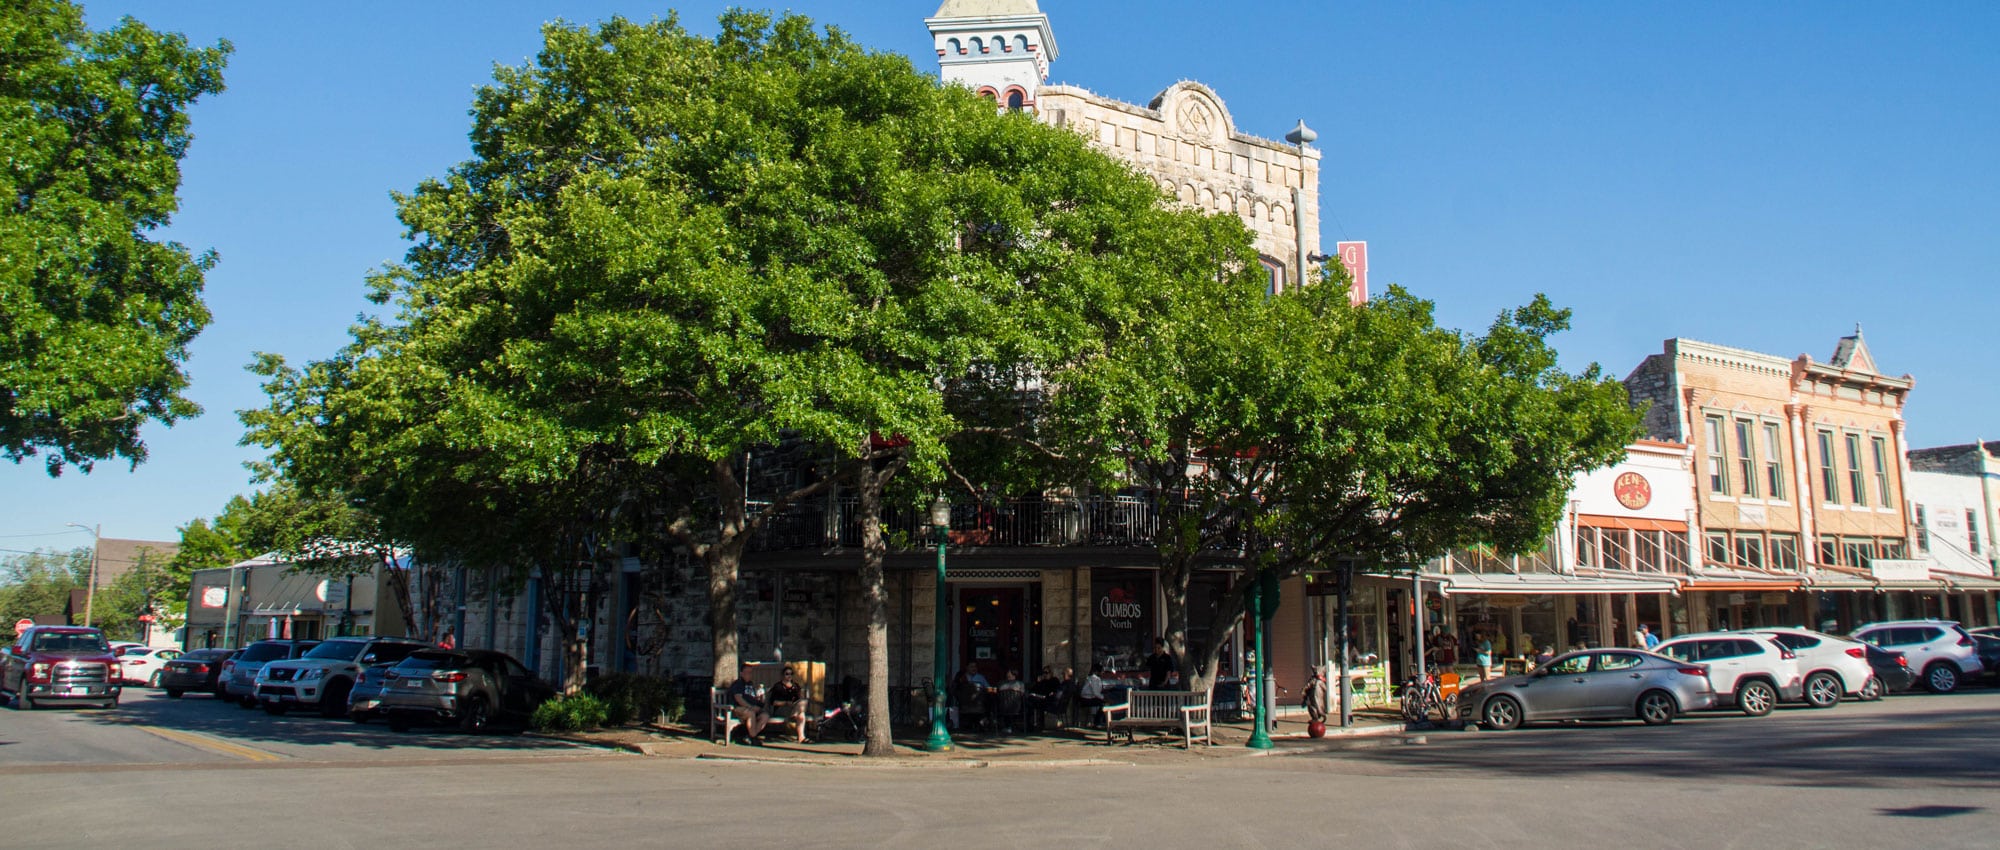 Your Guide to Georgetown, Texas: Gateway to the Austin MSA